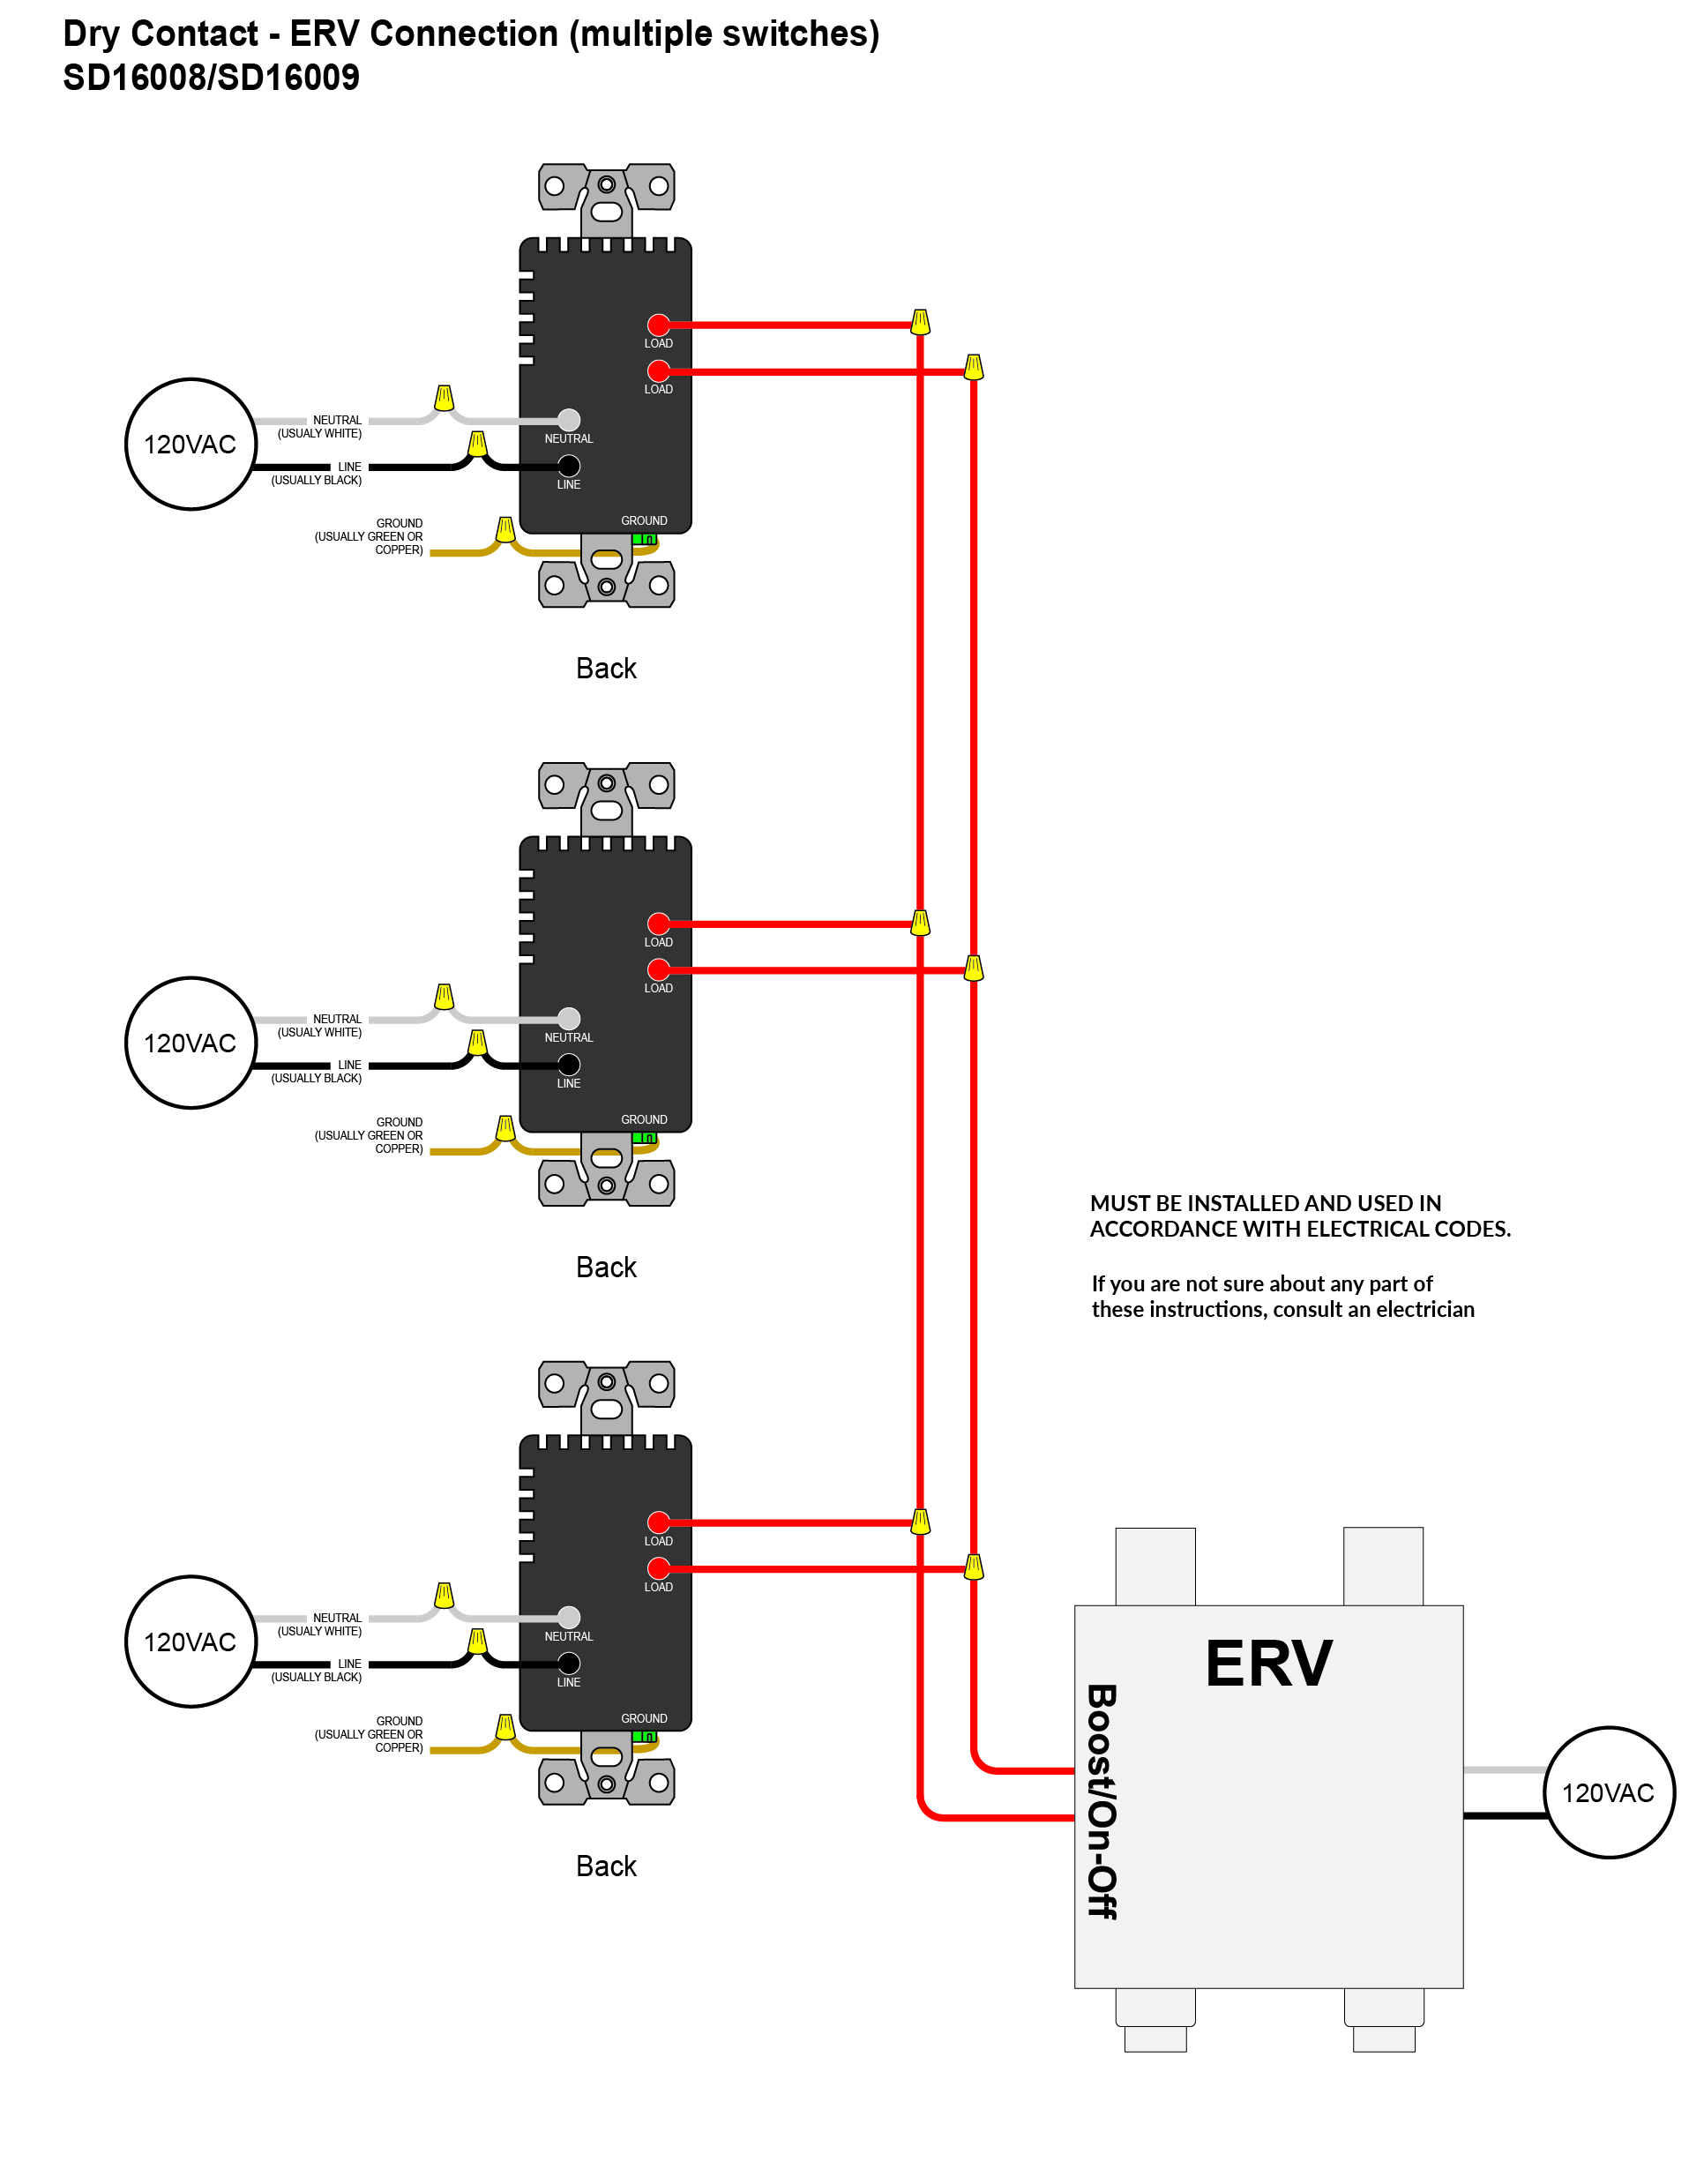 SD16008_SD16009-Dry_Contact-ERV_Connection_multiple_switches.jpg